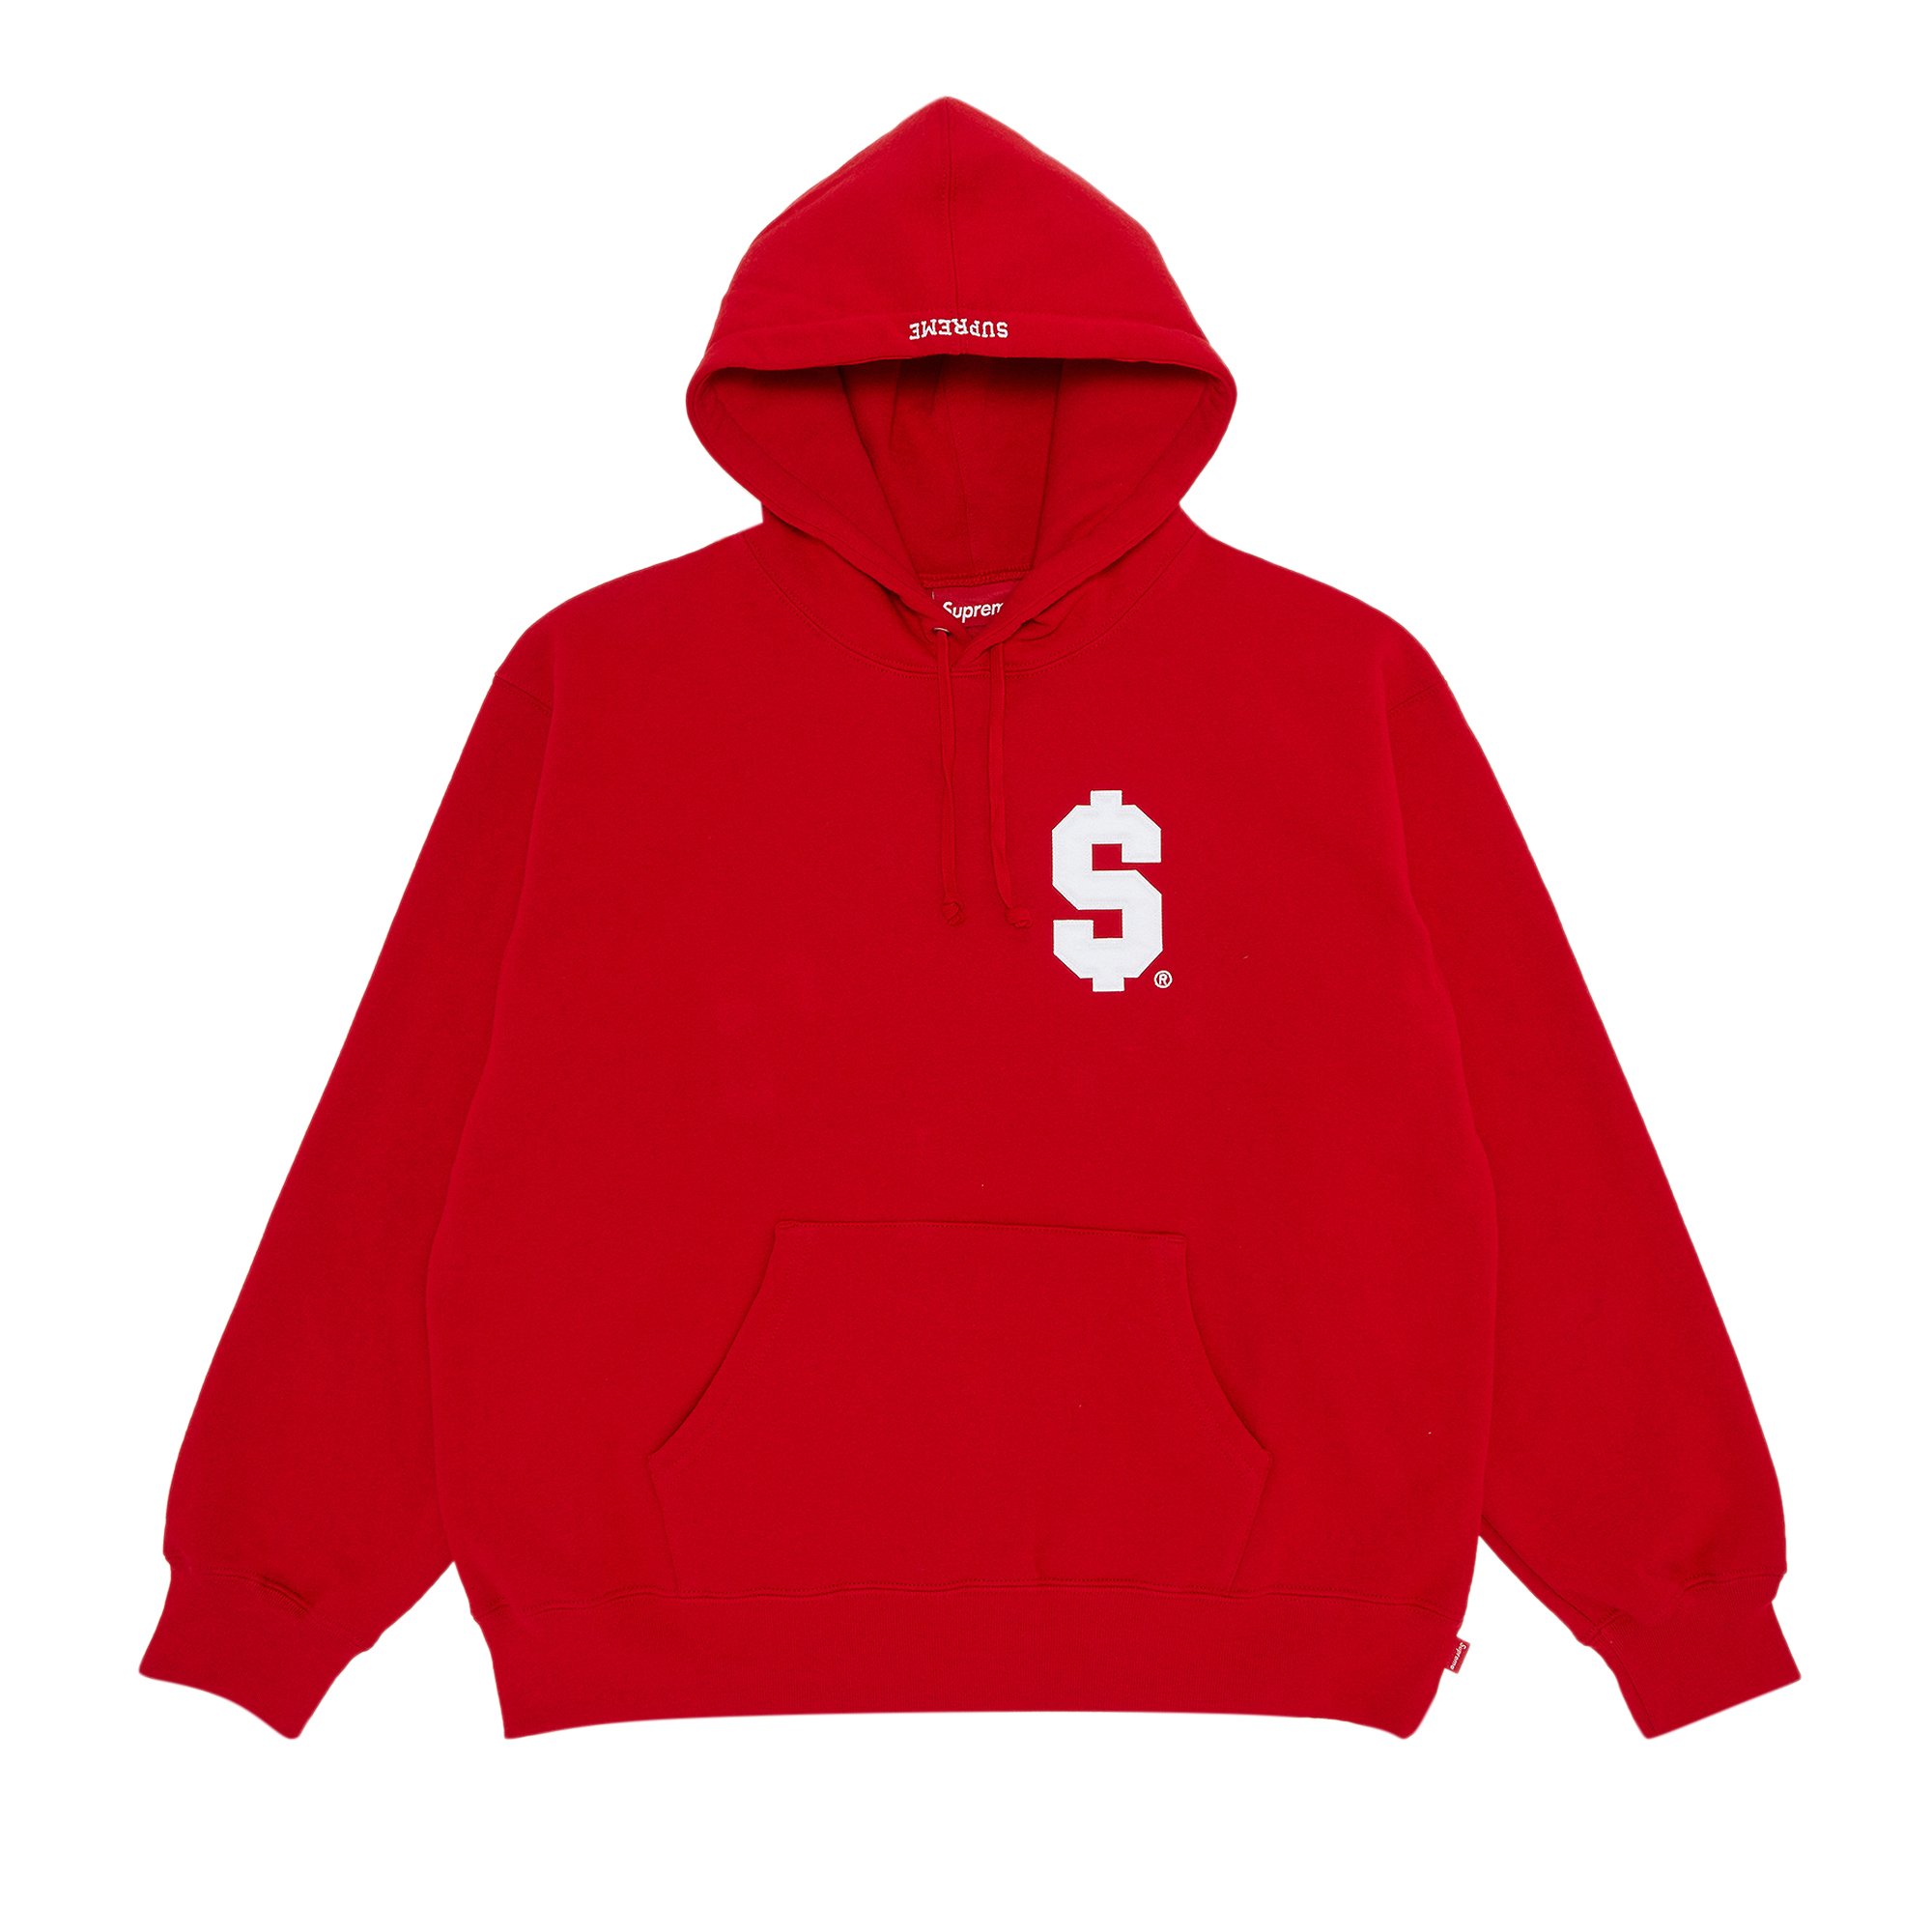 Buy Supreme $ Hooded Sweatshirt 'Red' - SS24SW58 RED | GOAT